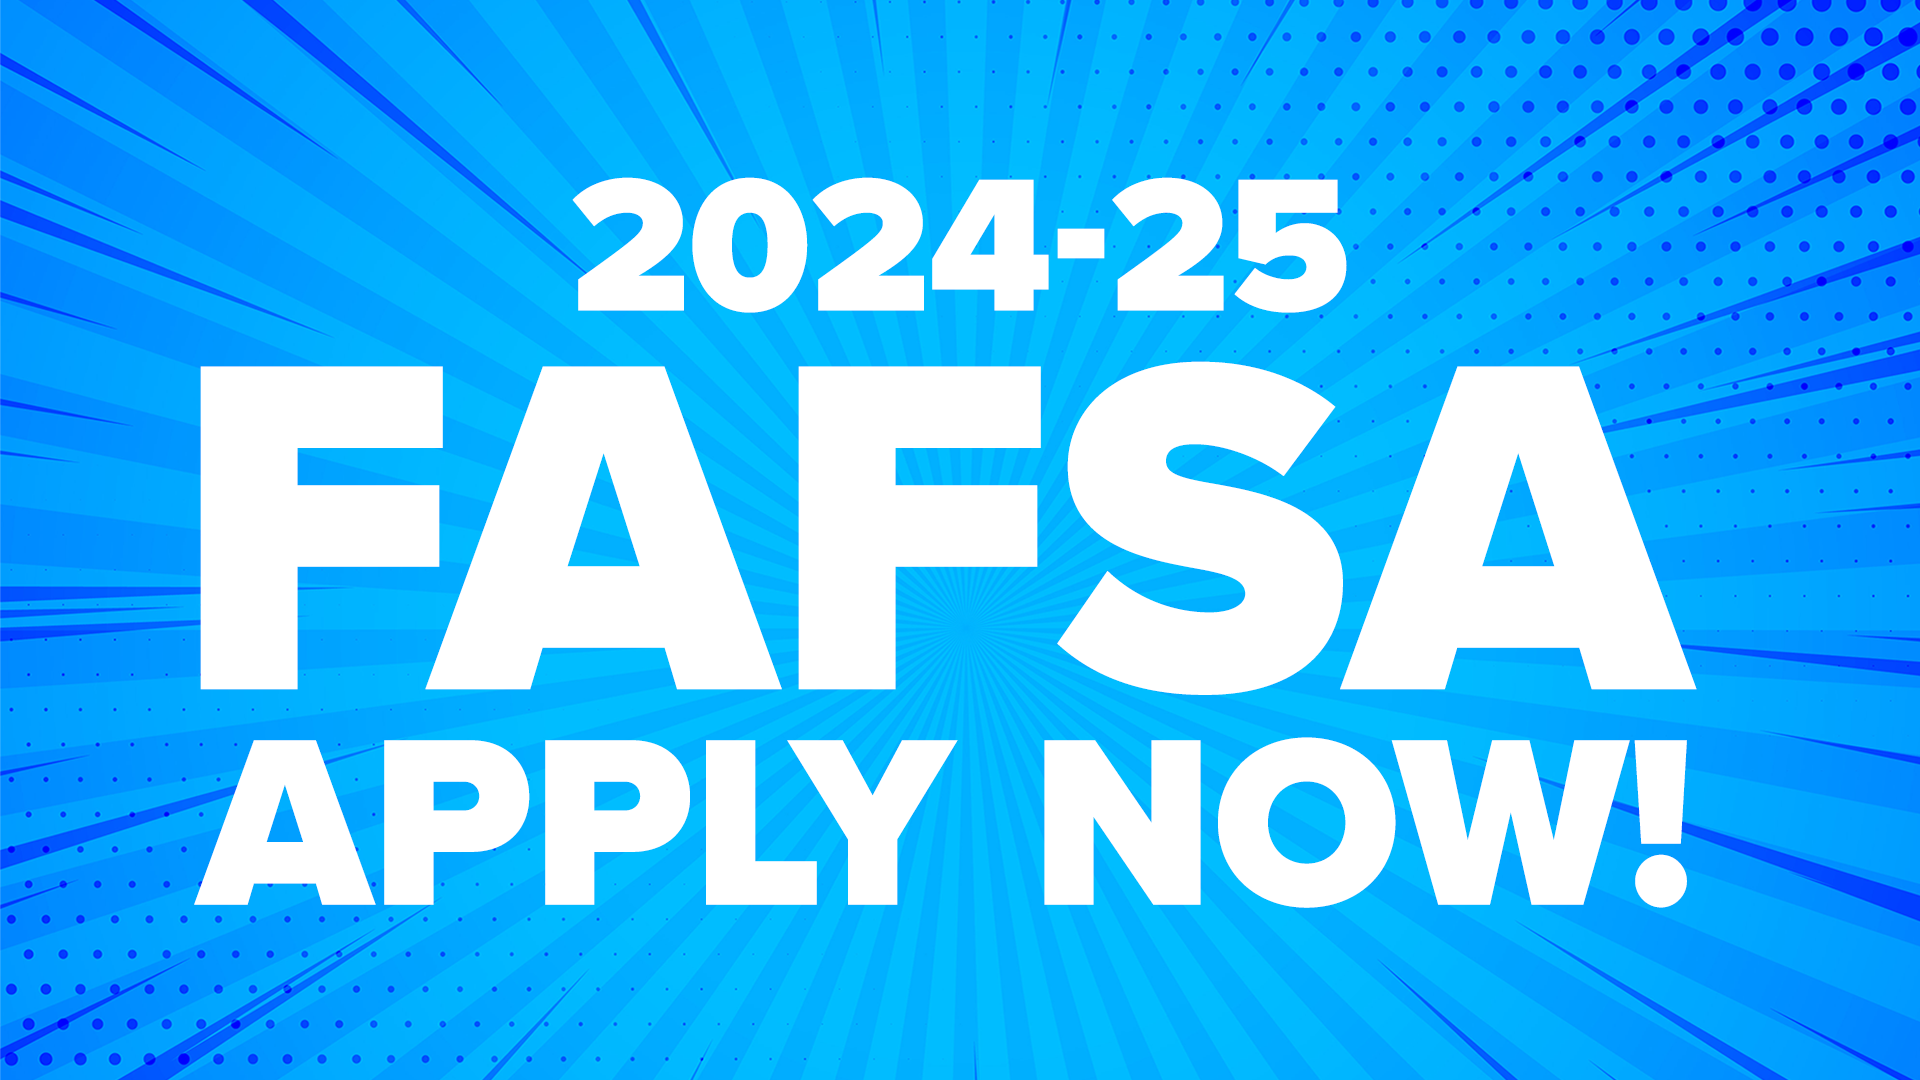 FAFSA Simplification. Apply NOW! Big changes coming for 2024-25 - make sure you are ready!